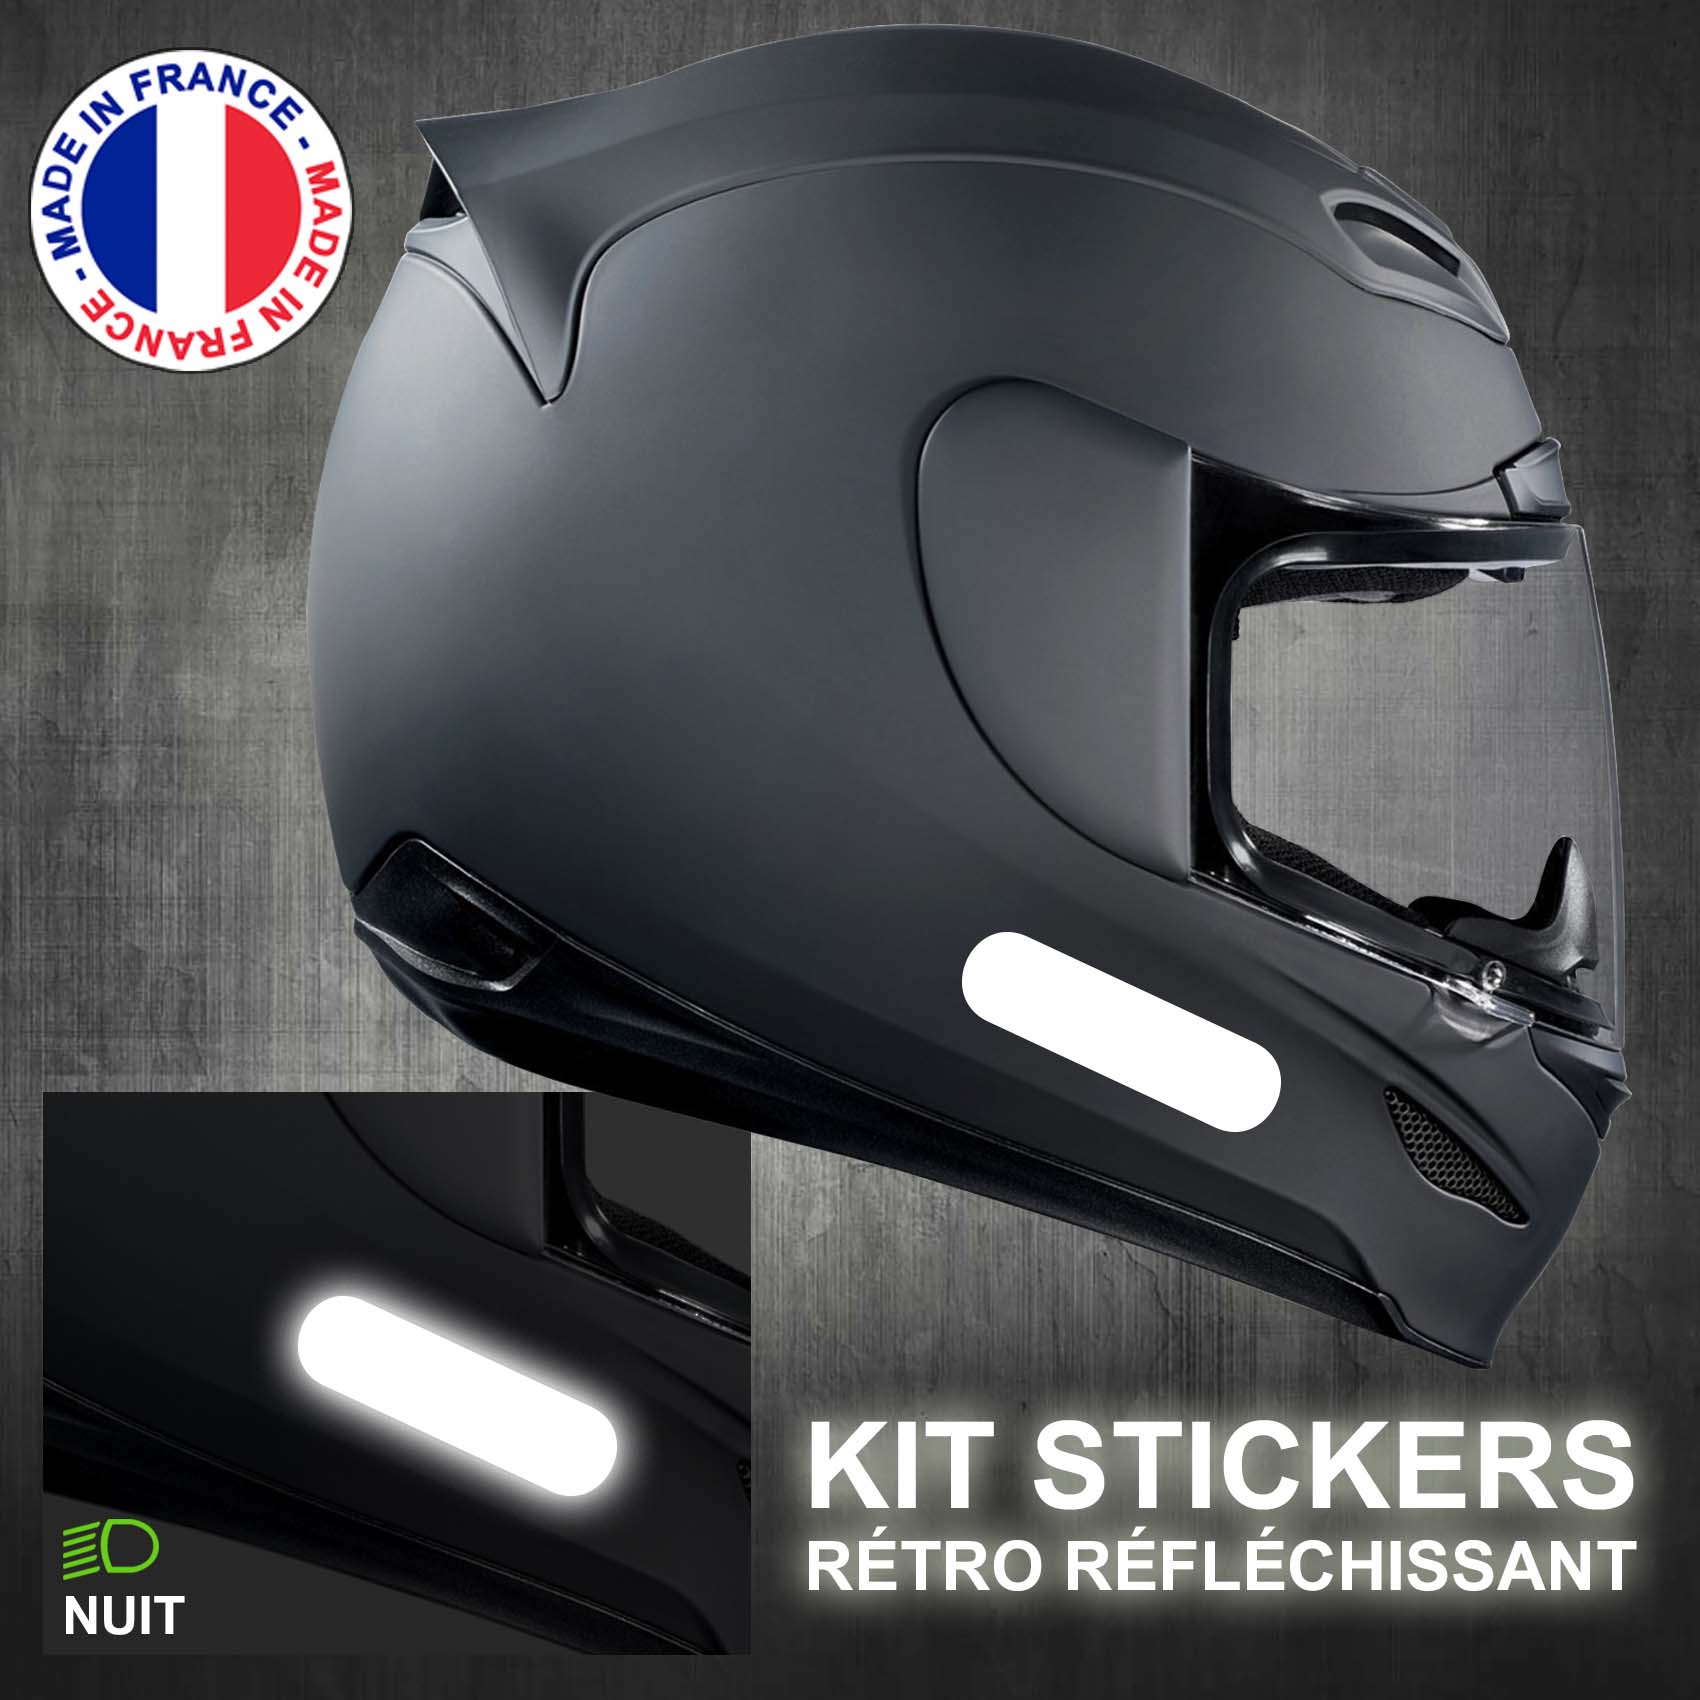 https://media.cdnws.com/_i/46016/6187/1691/88/stickers-reflechissant-blanc-bande-standard-ref1-casque-moto-retro-reflechissant-autocollant-moto-velo-tuning-racing-route-sticker-casques-adhesif-scooter-nuit-securite-decals-personnalise-personnalisable-min.jpeg